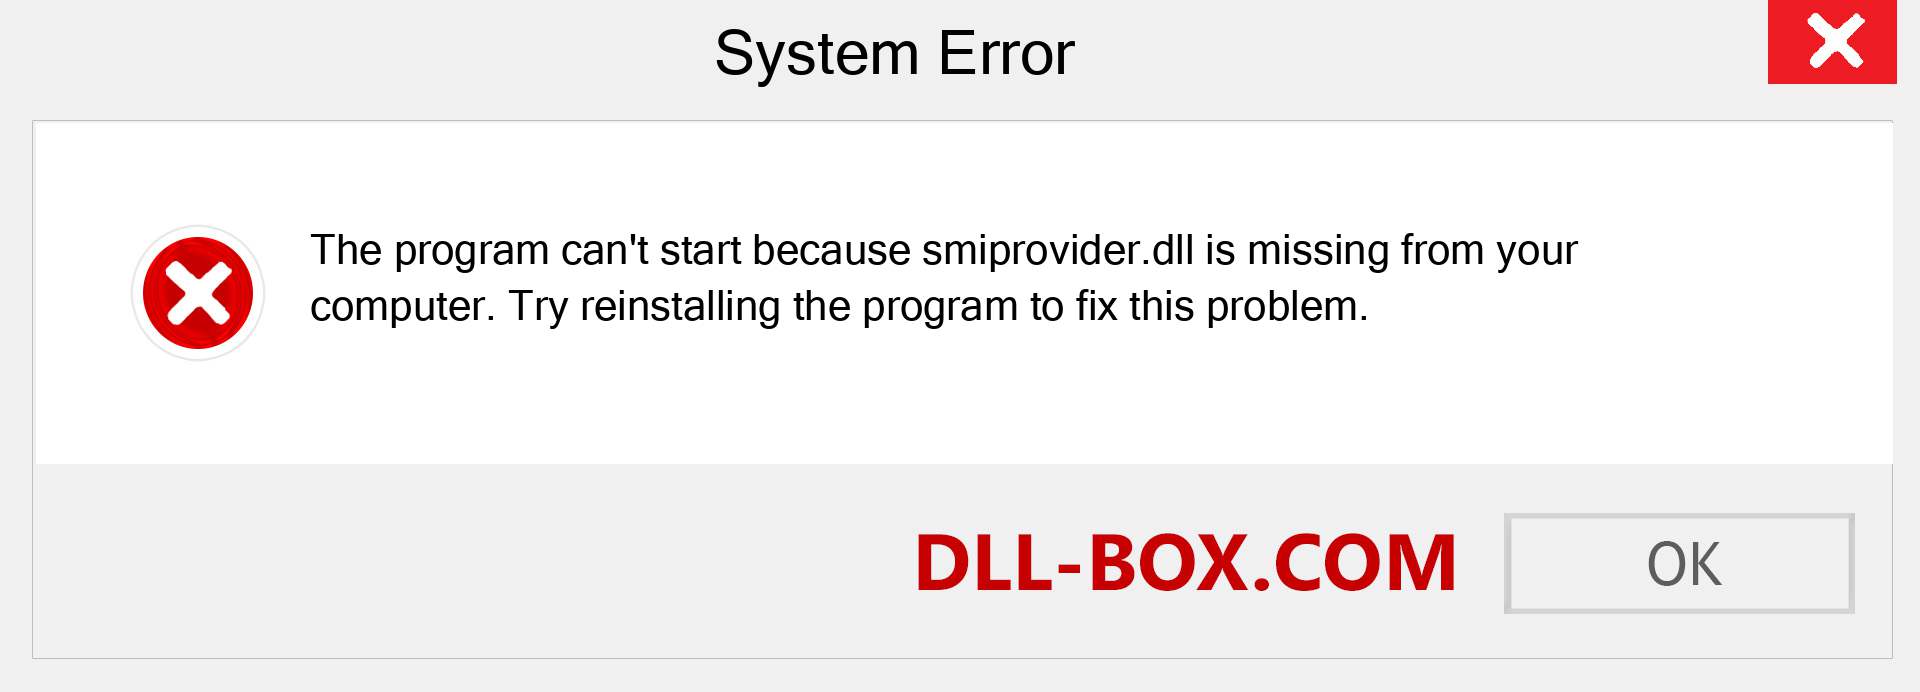  smiprovider.dll file is missing?. Download for Windows 7, 8, 10 - Fix  smiprovider dll Missing Error on Windows, photos, images